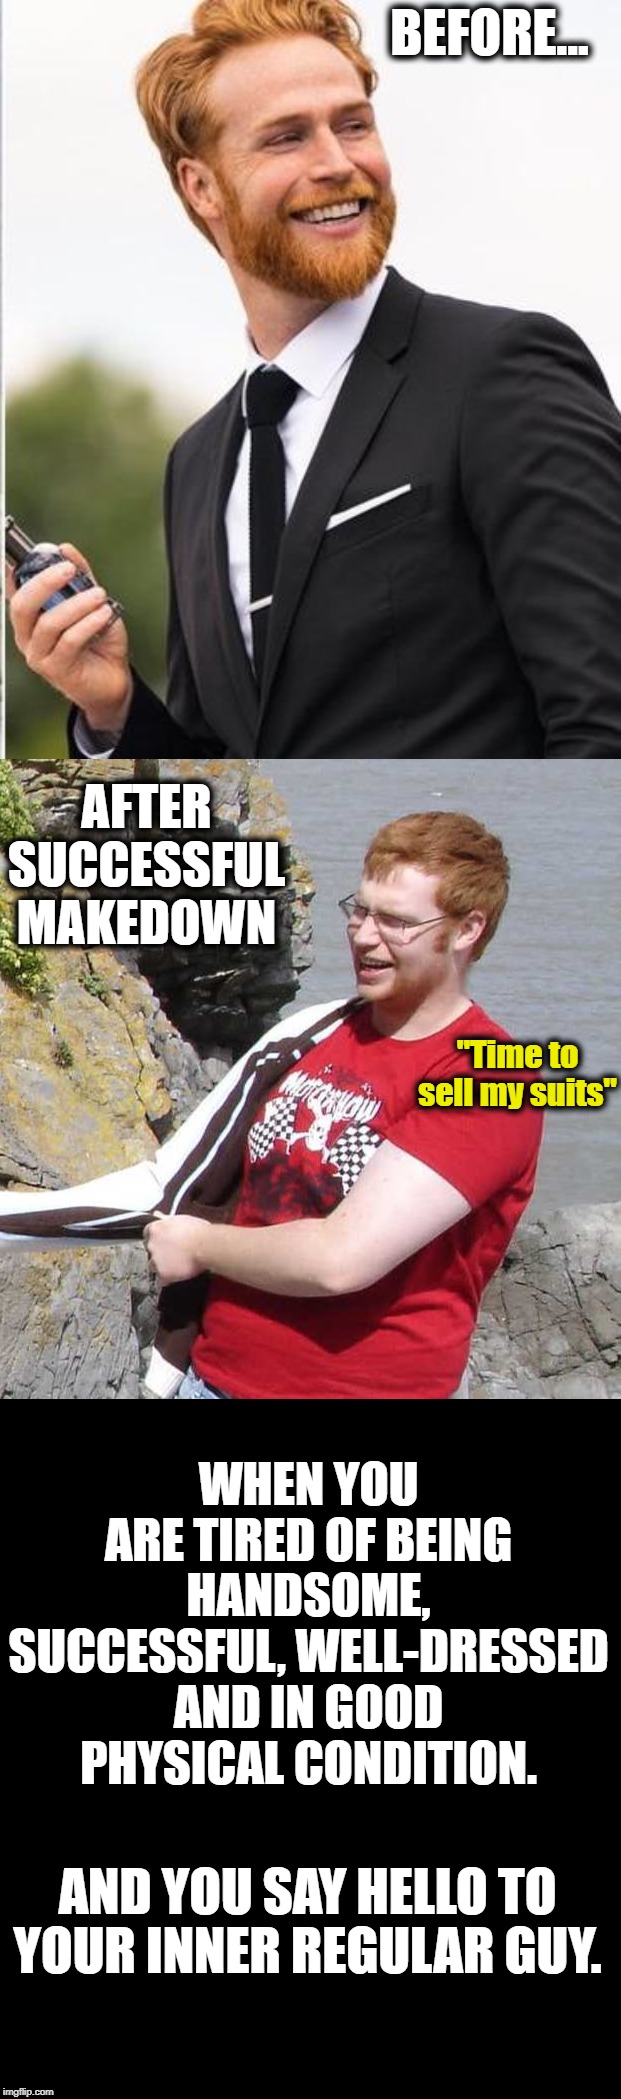 When Being Perfect is Too Demanding | BEFORE... AFTER SUCCESSFUL MAKEDOWN; "Time to sell my suits"; WHEN YOU ARE TIRED OF BEING HANDSOME, SUCCESSFUL, WELL-DRESSED AND IN GOOD PHYSICAL CONDITION. AND YOU SAY HELLO TO YOUR INNER REGULAR GUY. | image tagged in funny | made w/ Imgflip meme maker